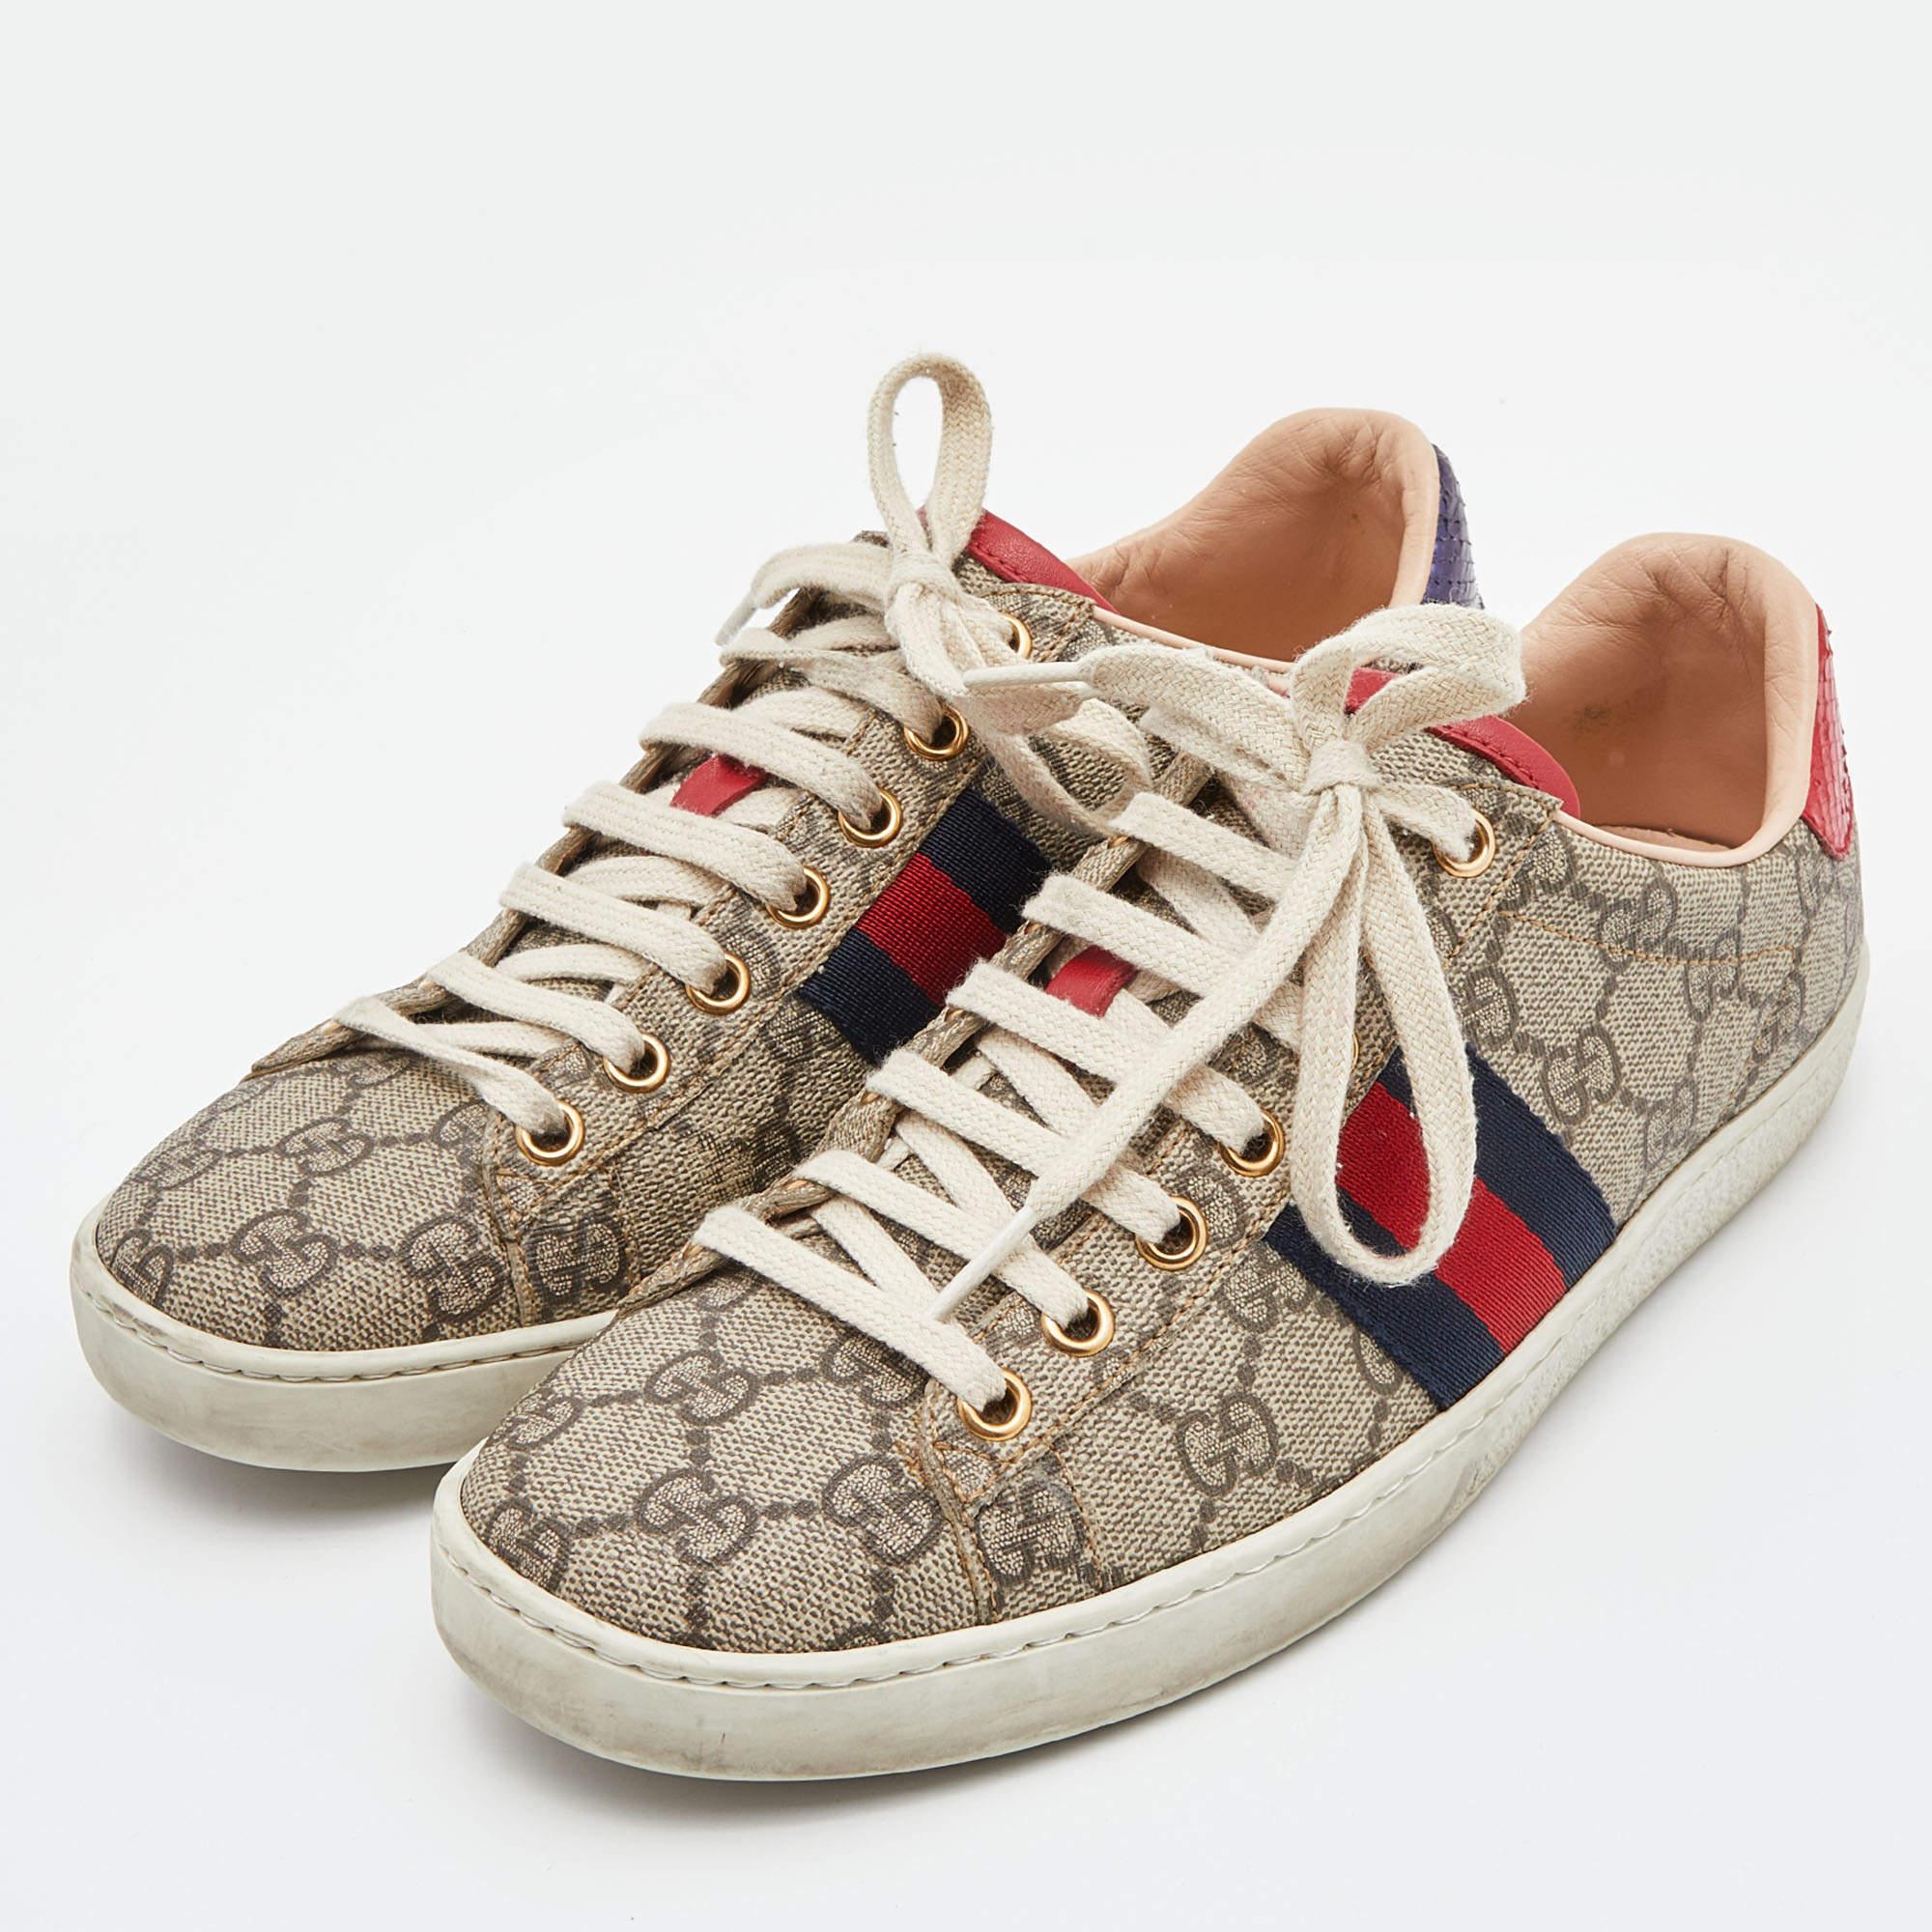 Women's Gucci Beige/Brown GG Supreme Canvas Ace Sneakers Size 37